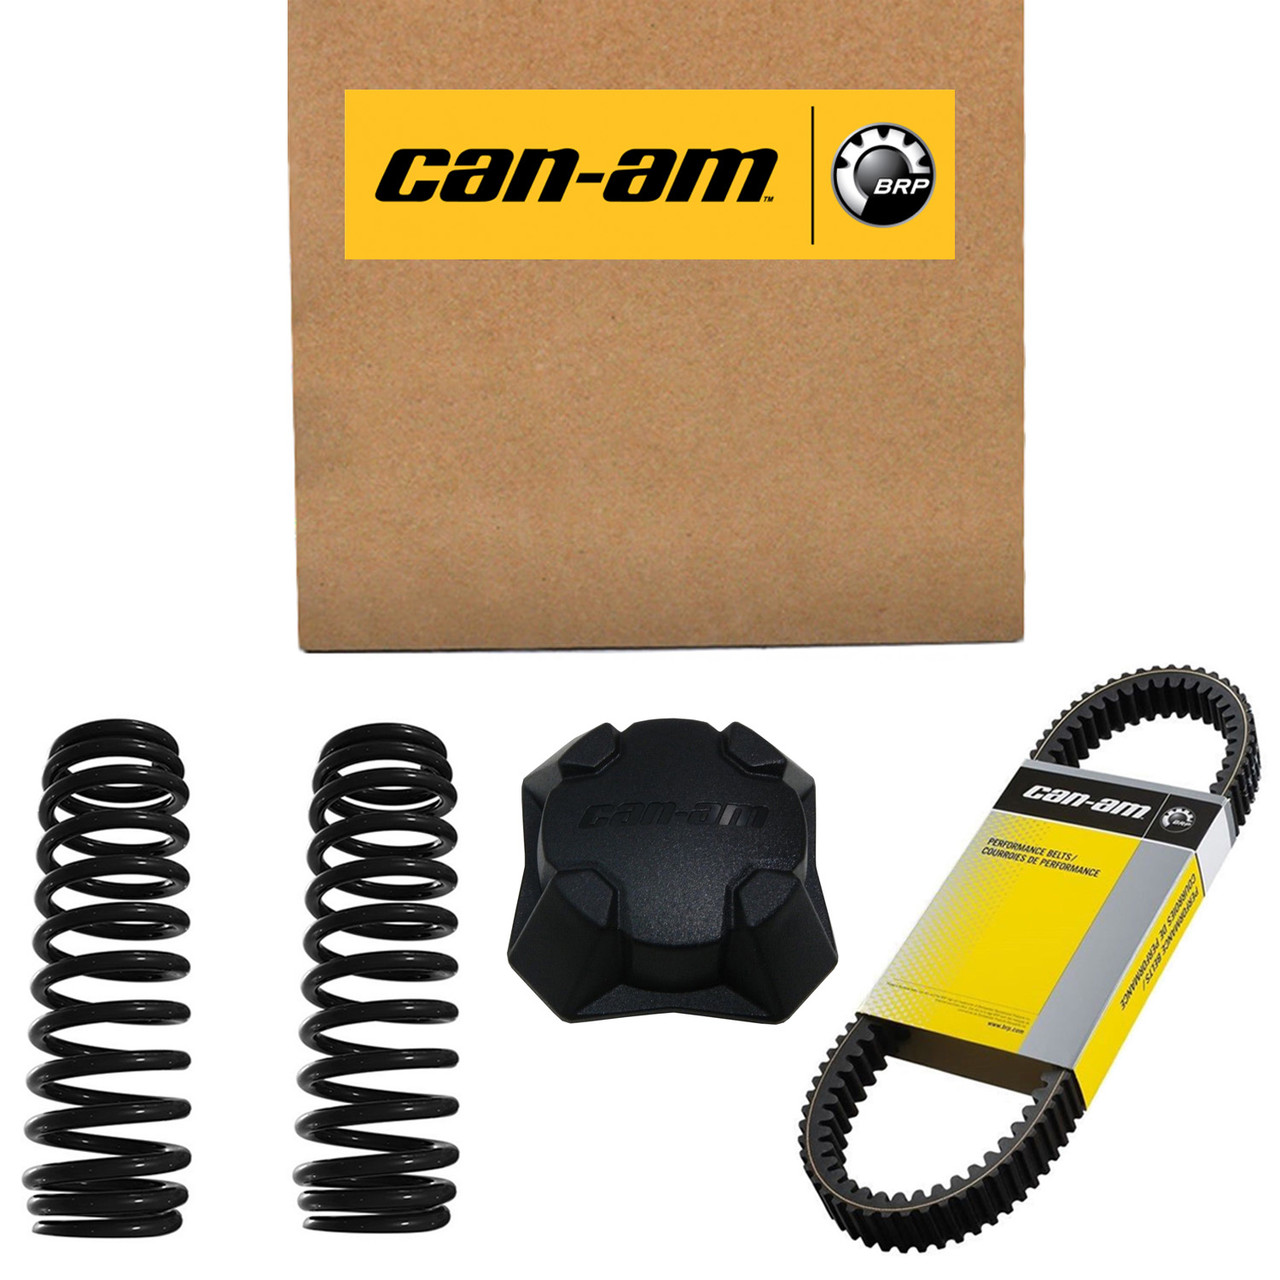 Can-Am New OEM Yellow Lh Front Fender Kit, 715002199